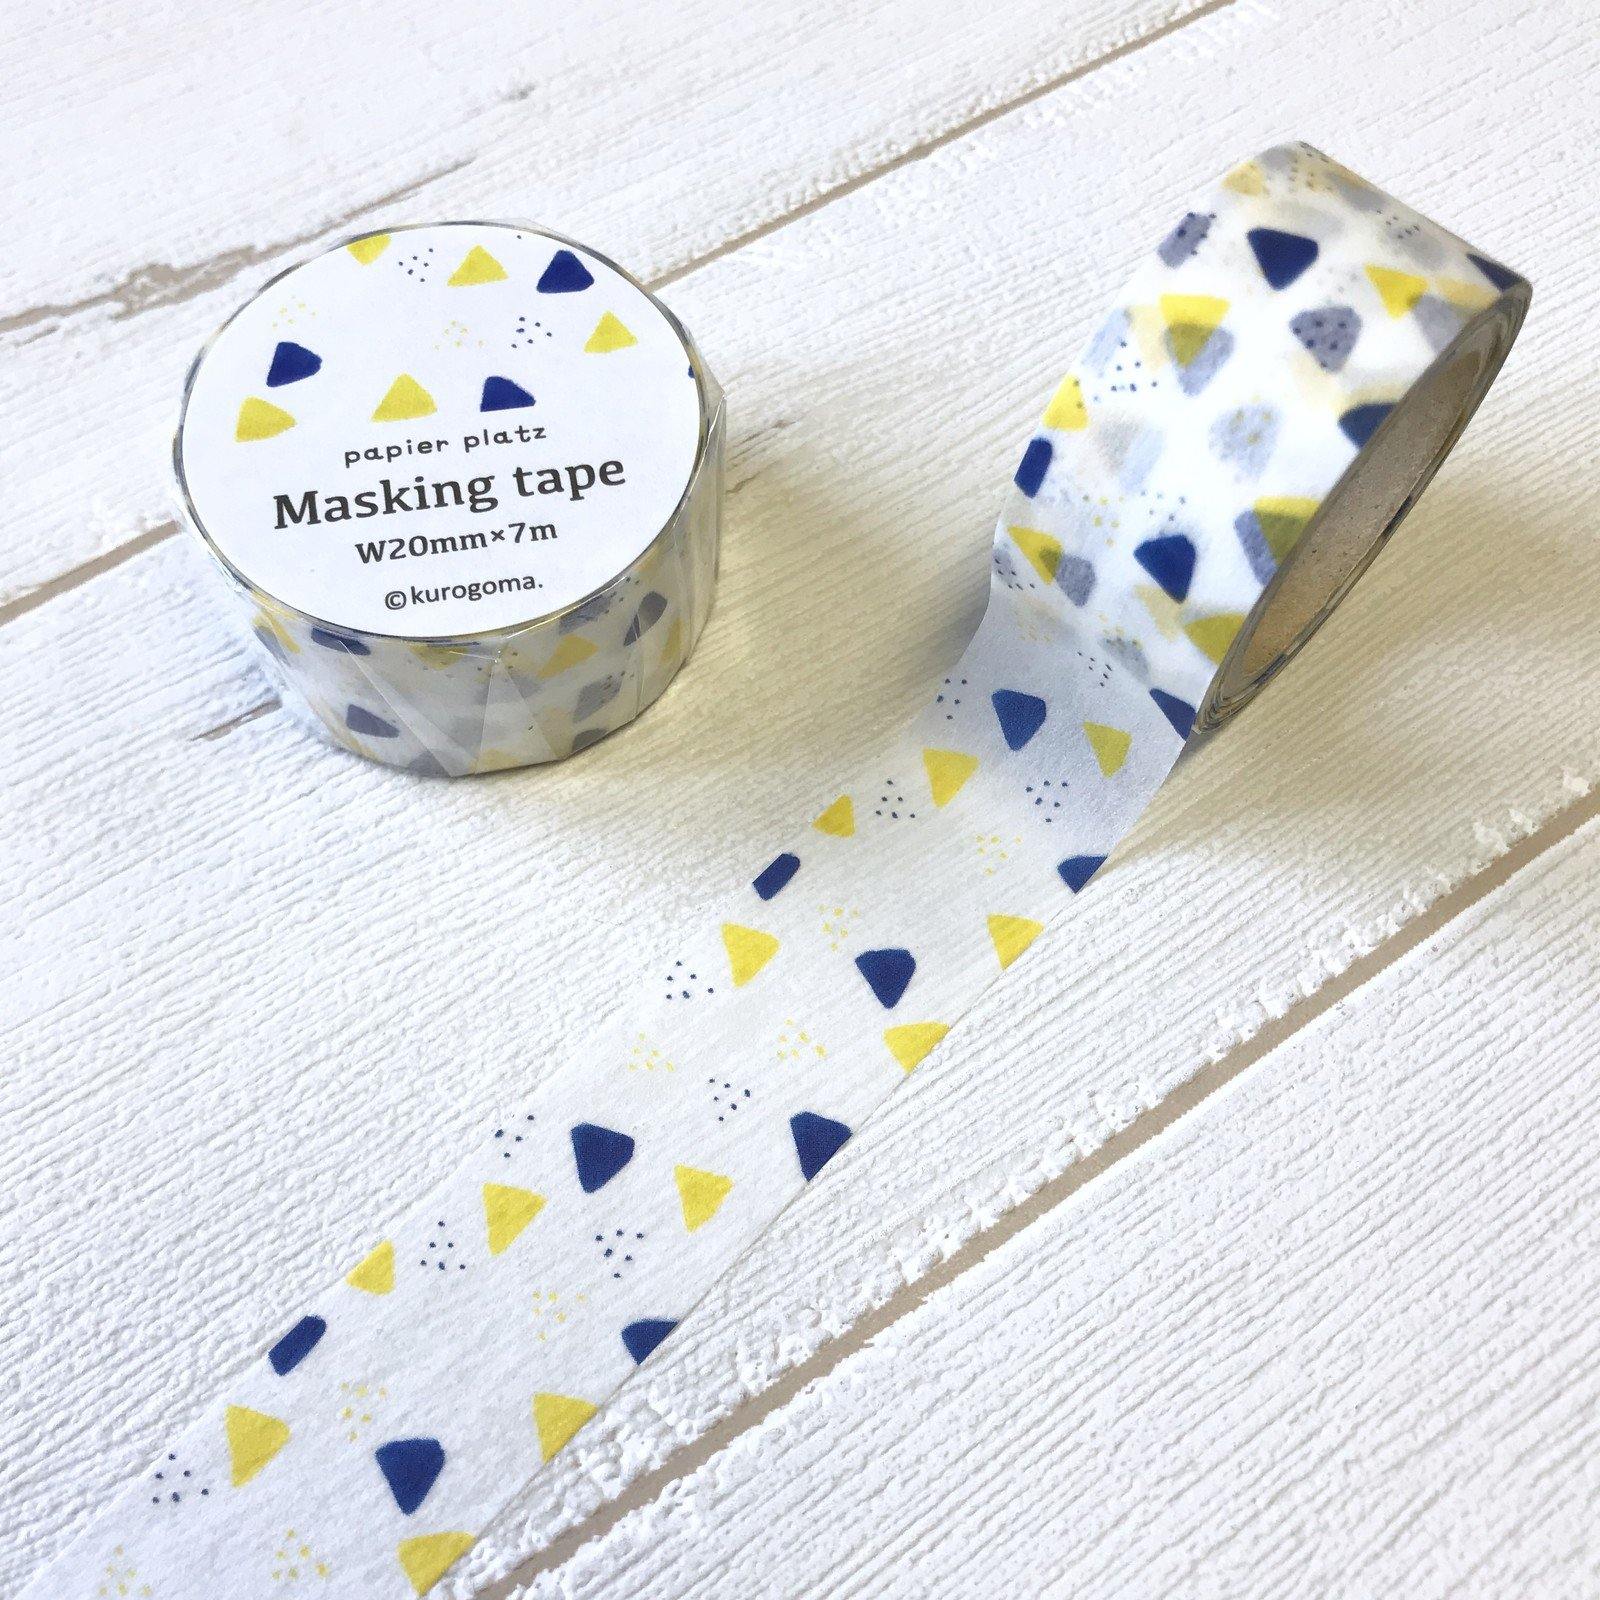 Papier Platz Washi Tape (20mm) - Yellow & Blue Triangles | papermindstationery.com | 20mm Washi Tapes, boxing, Others, Papier Platz, sale, Washi Tapes